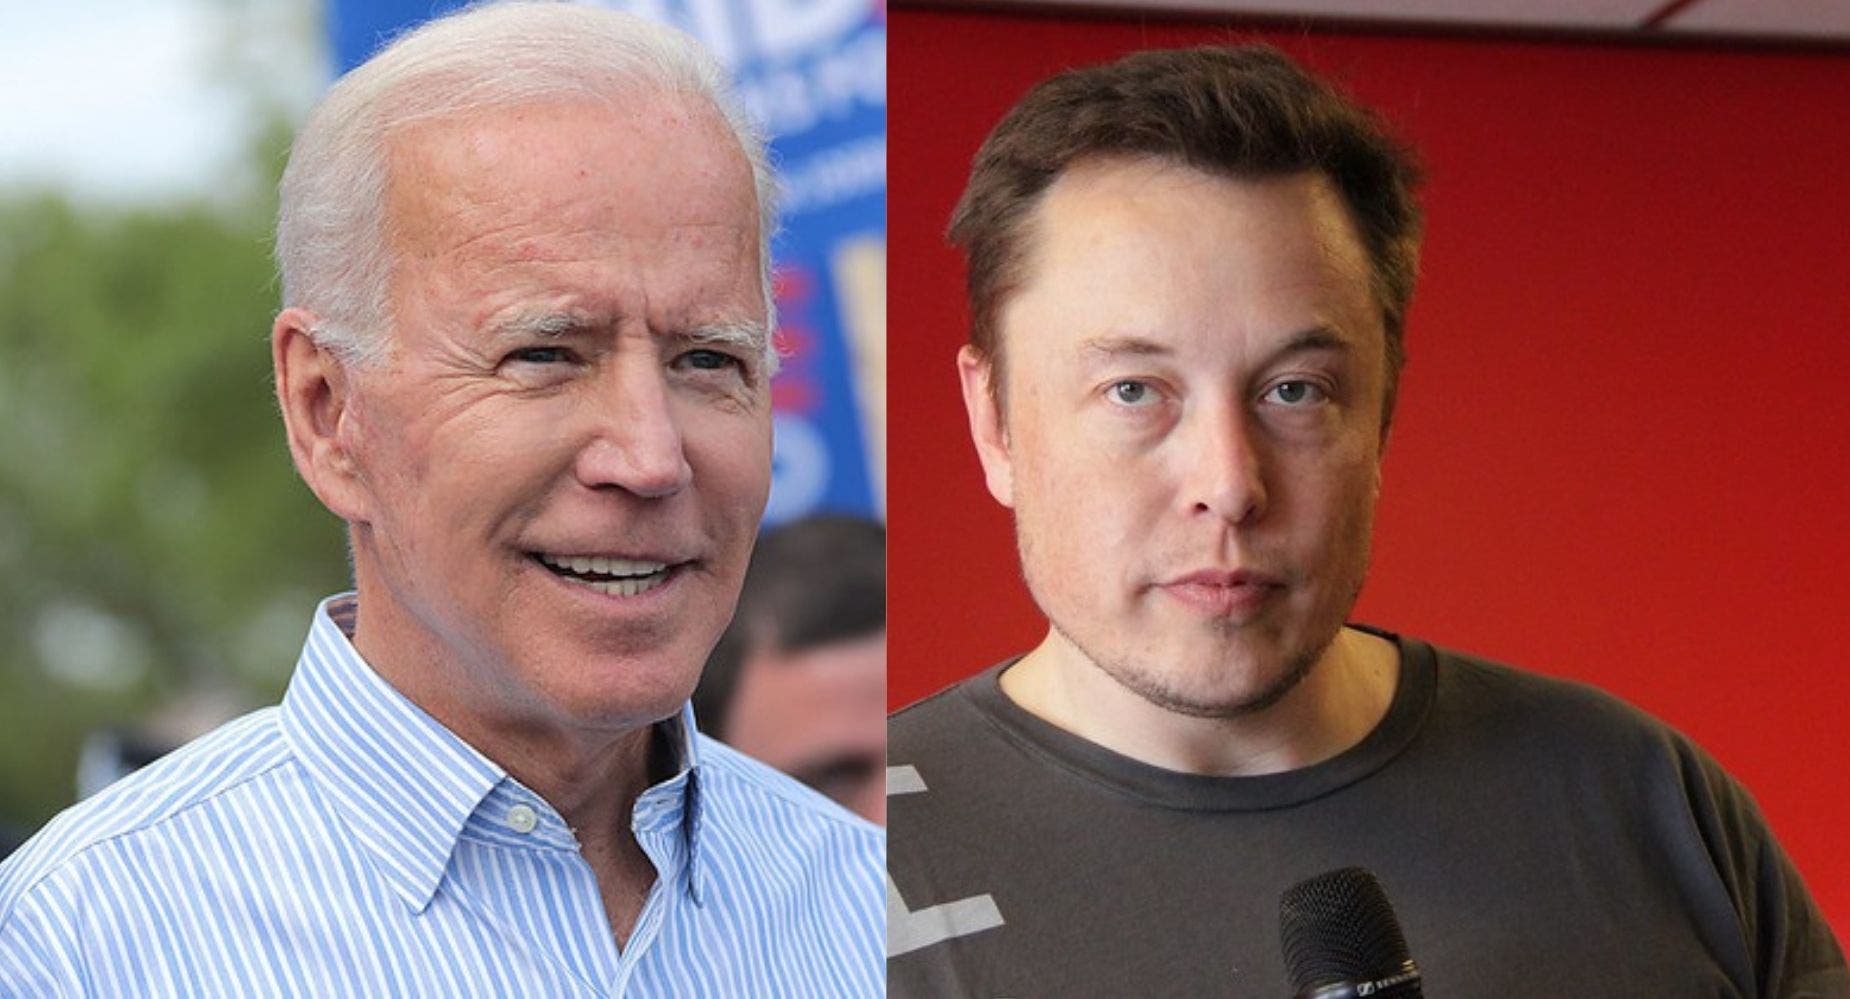 Elon Musk Takes A Jab At Biden: Here's Who The Tesla CEO Calls 'The Real President!'